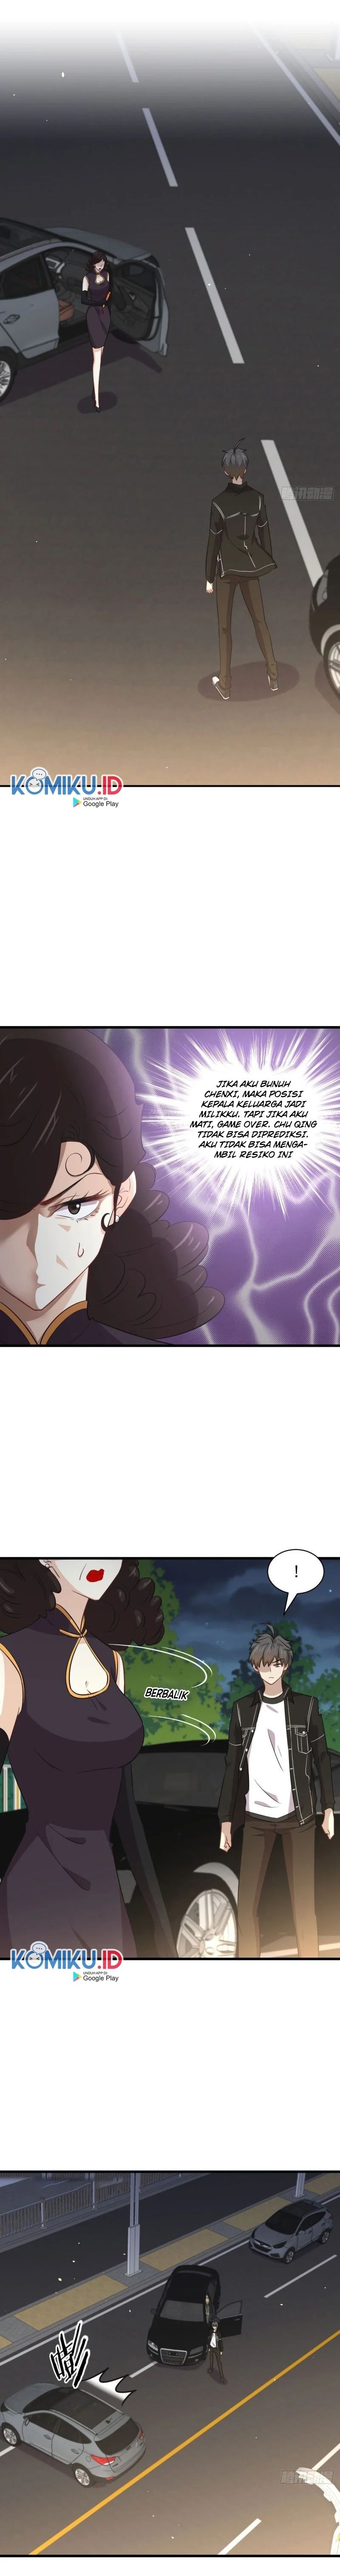 Immortal Swordsman in The Reverse World: Chapter 158 - Page 1